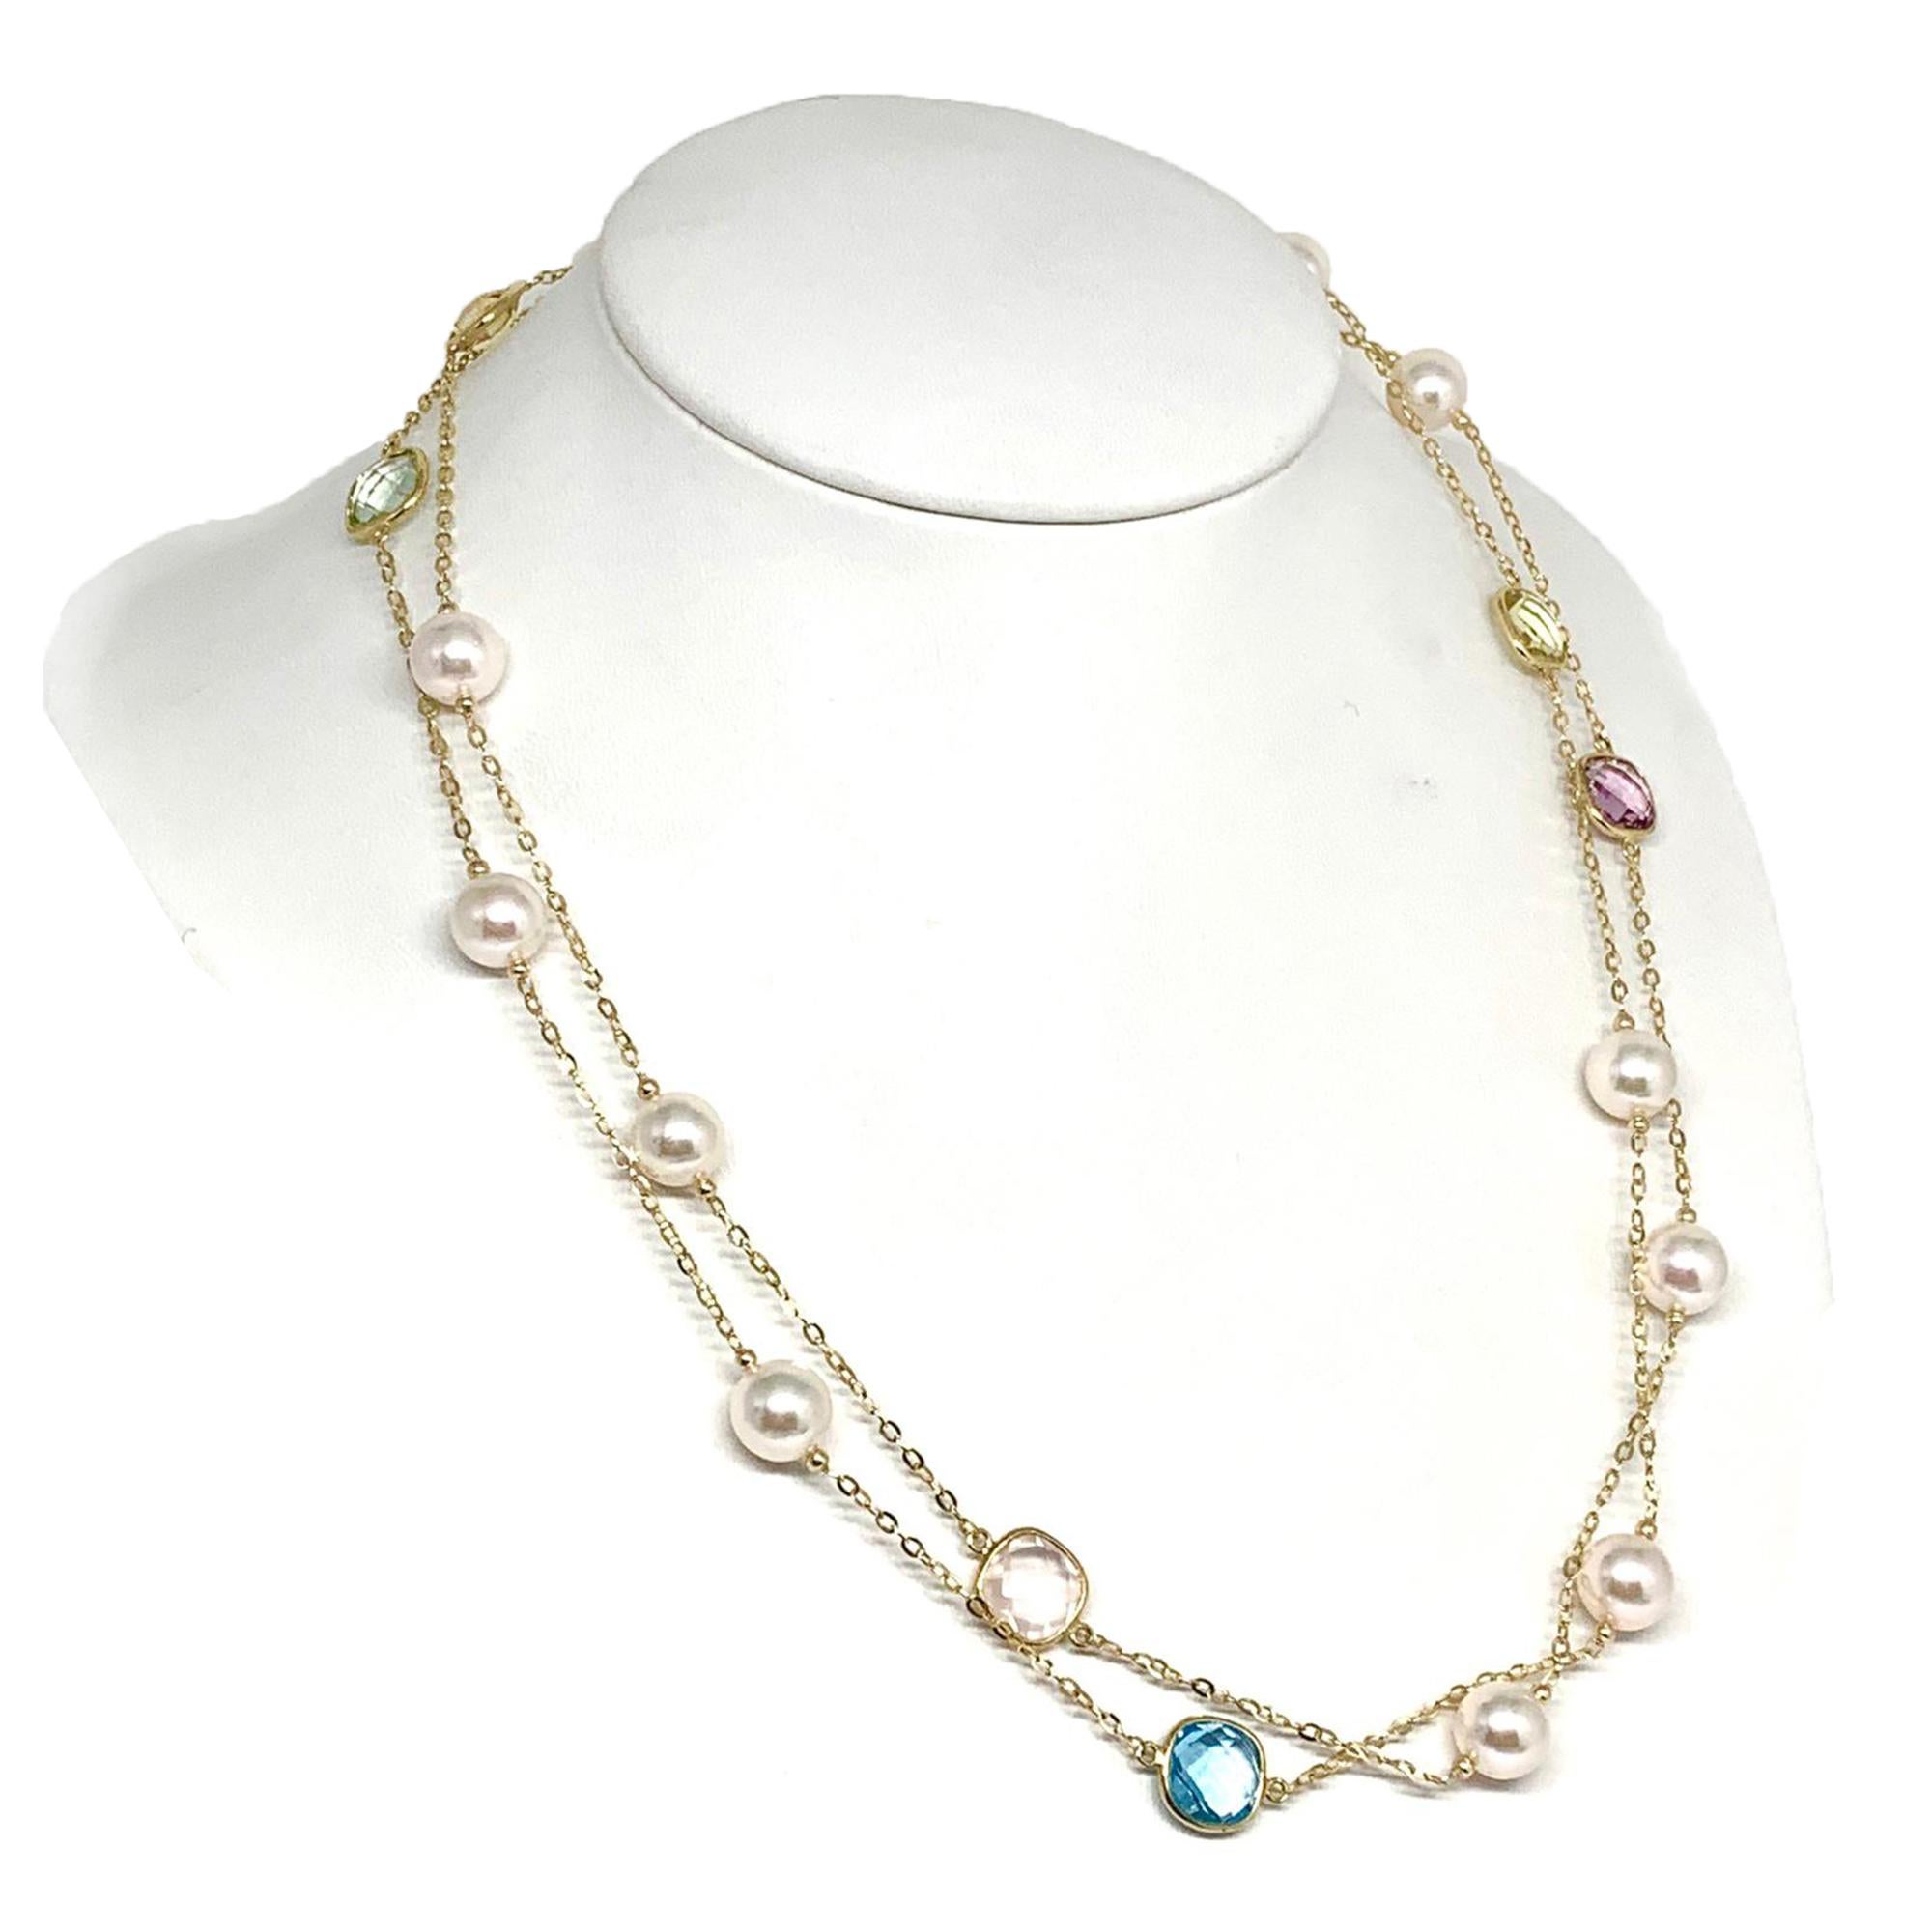 Fine Quality Akoya Pearl Quartz Necklace 14k Gold 8.5 mm Certified $2,750 822111

This is a Unique Custom Made Glamorous Piece of Jewelry!

MADE IN ITALY

Nothing says, “I Love you” more than Diamonds and Pearls!

This Akoya pearl necklace has been